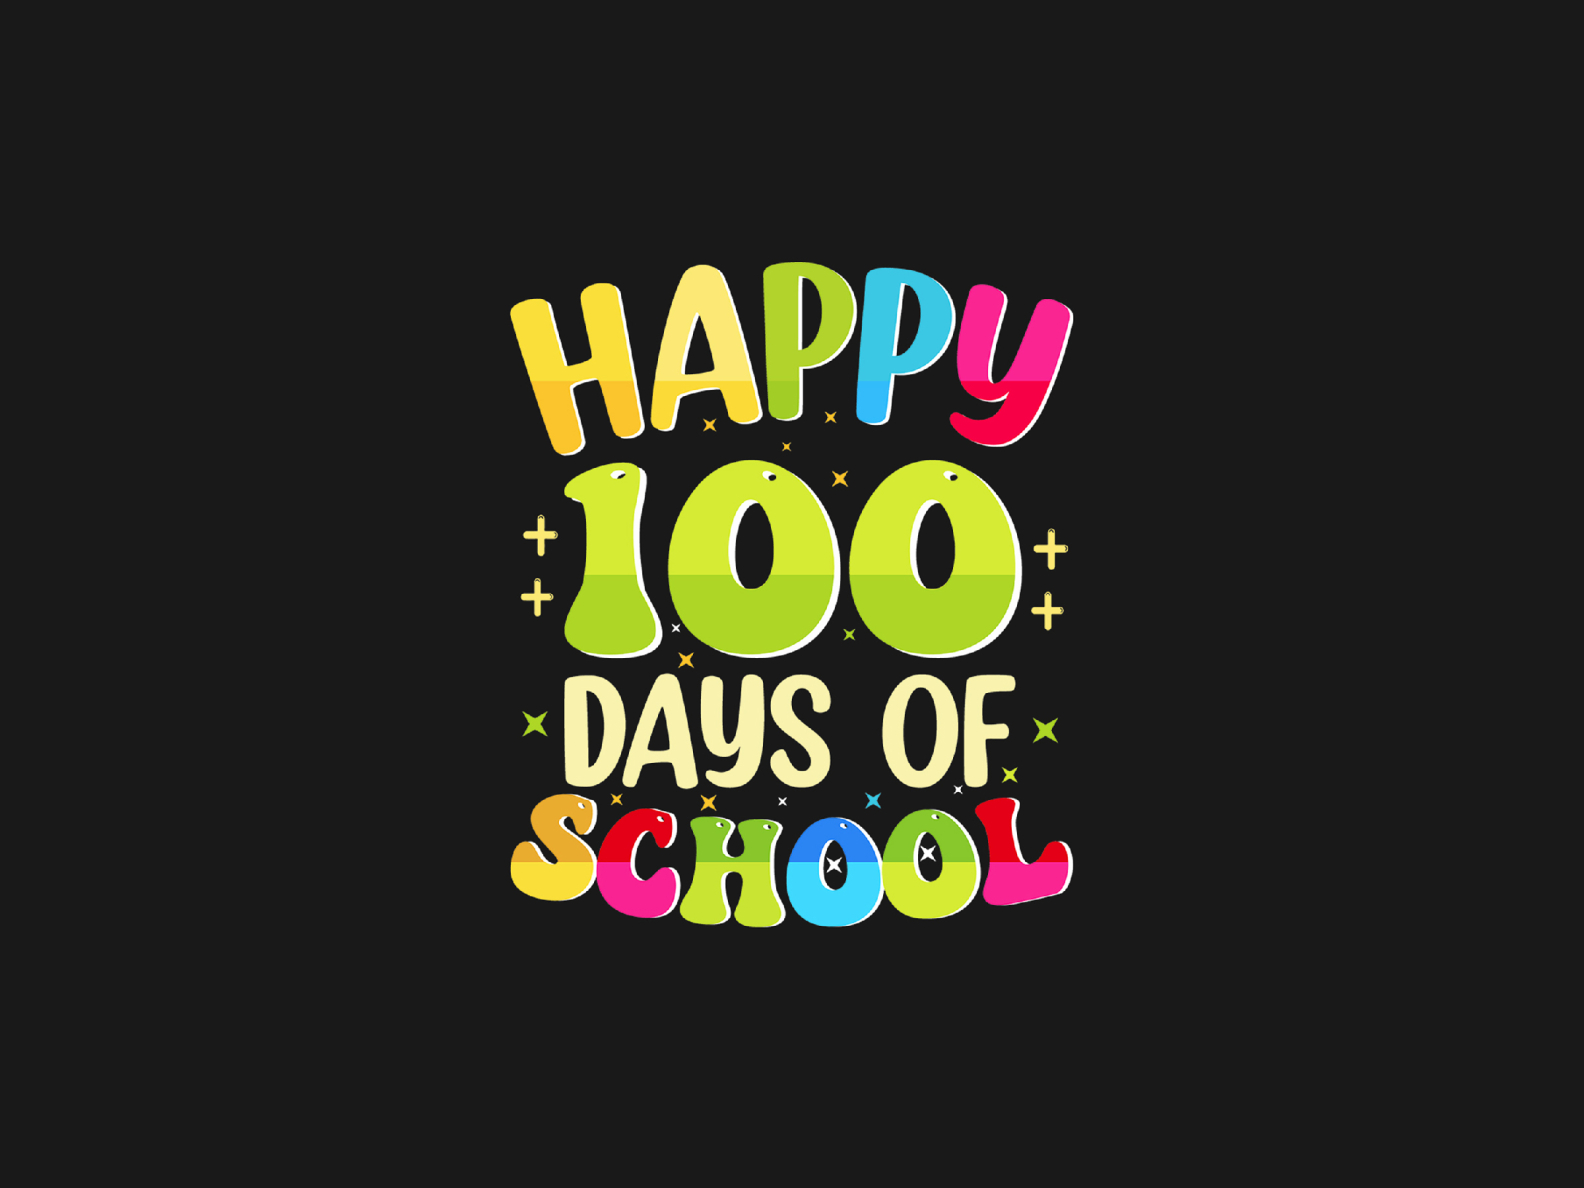 100 DAYS OF SCHOOL QUOTE TEMPLATE by Purnima Roy on Dribbble